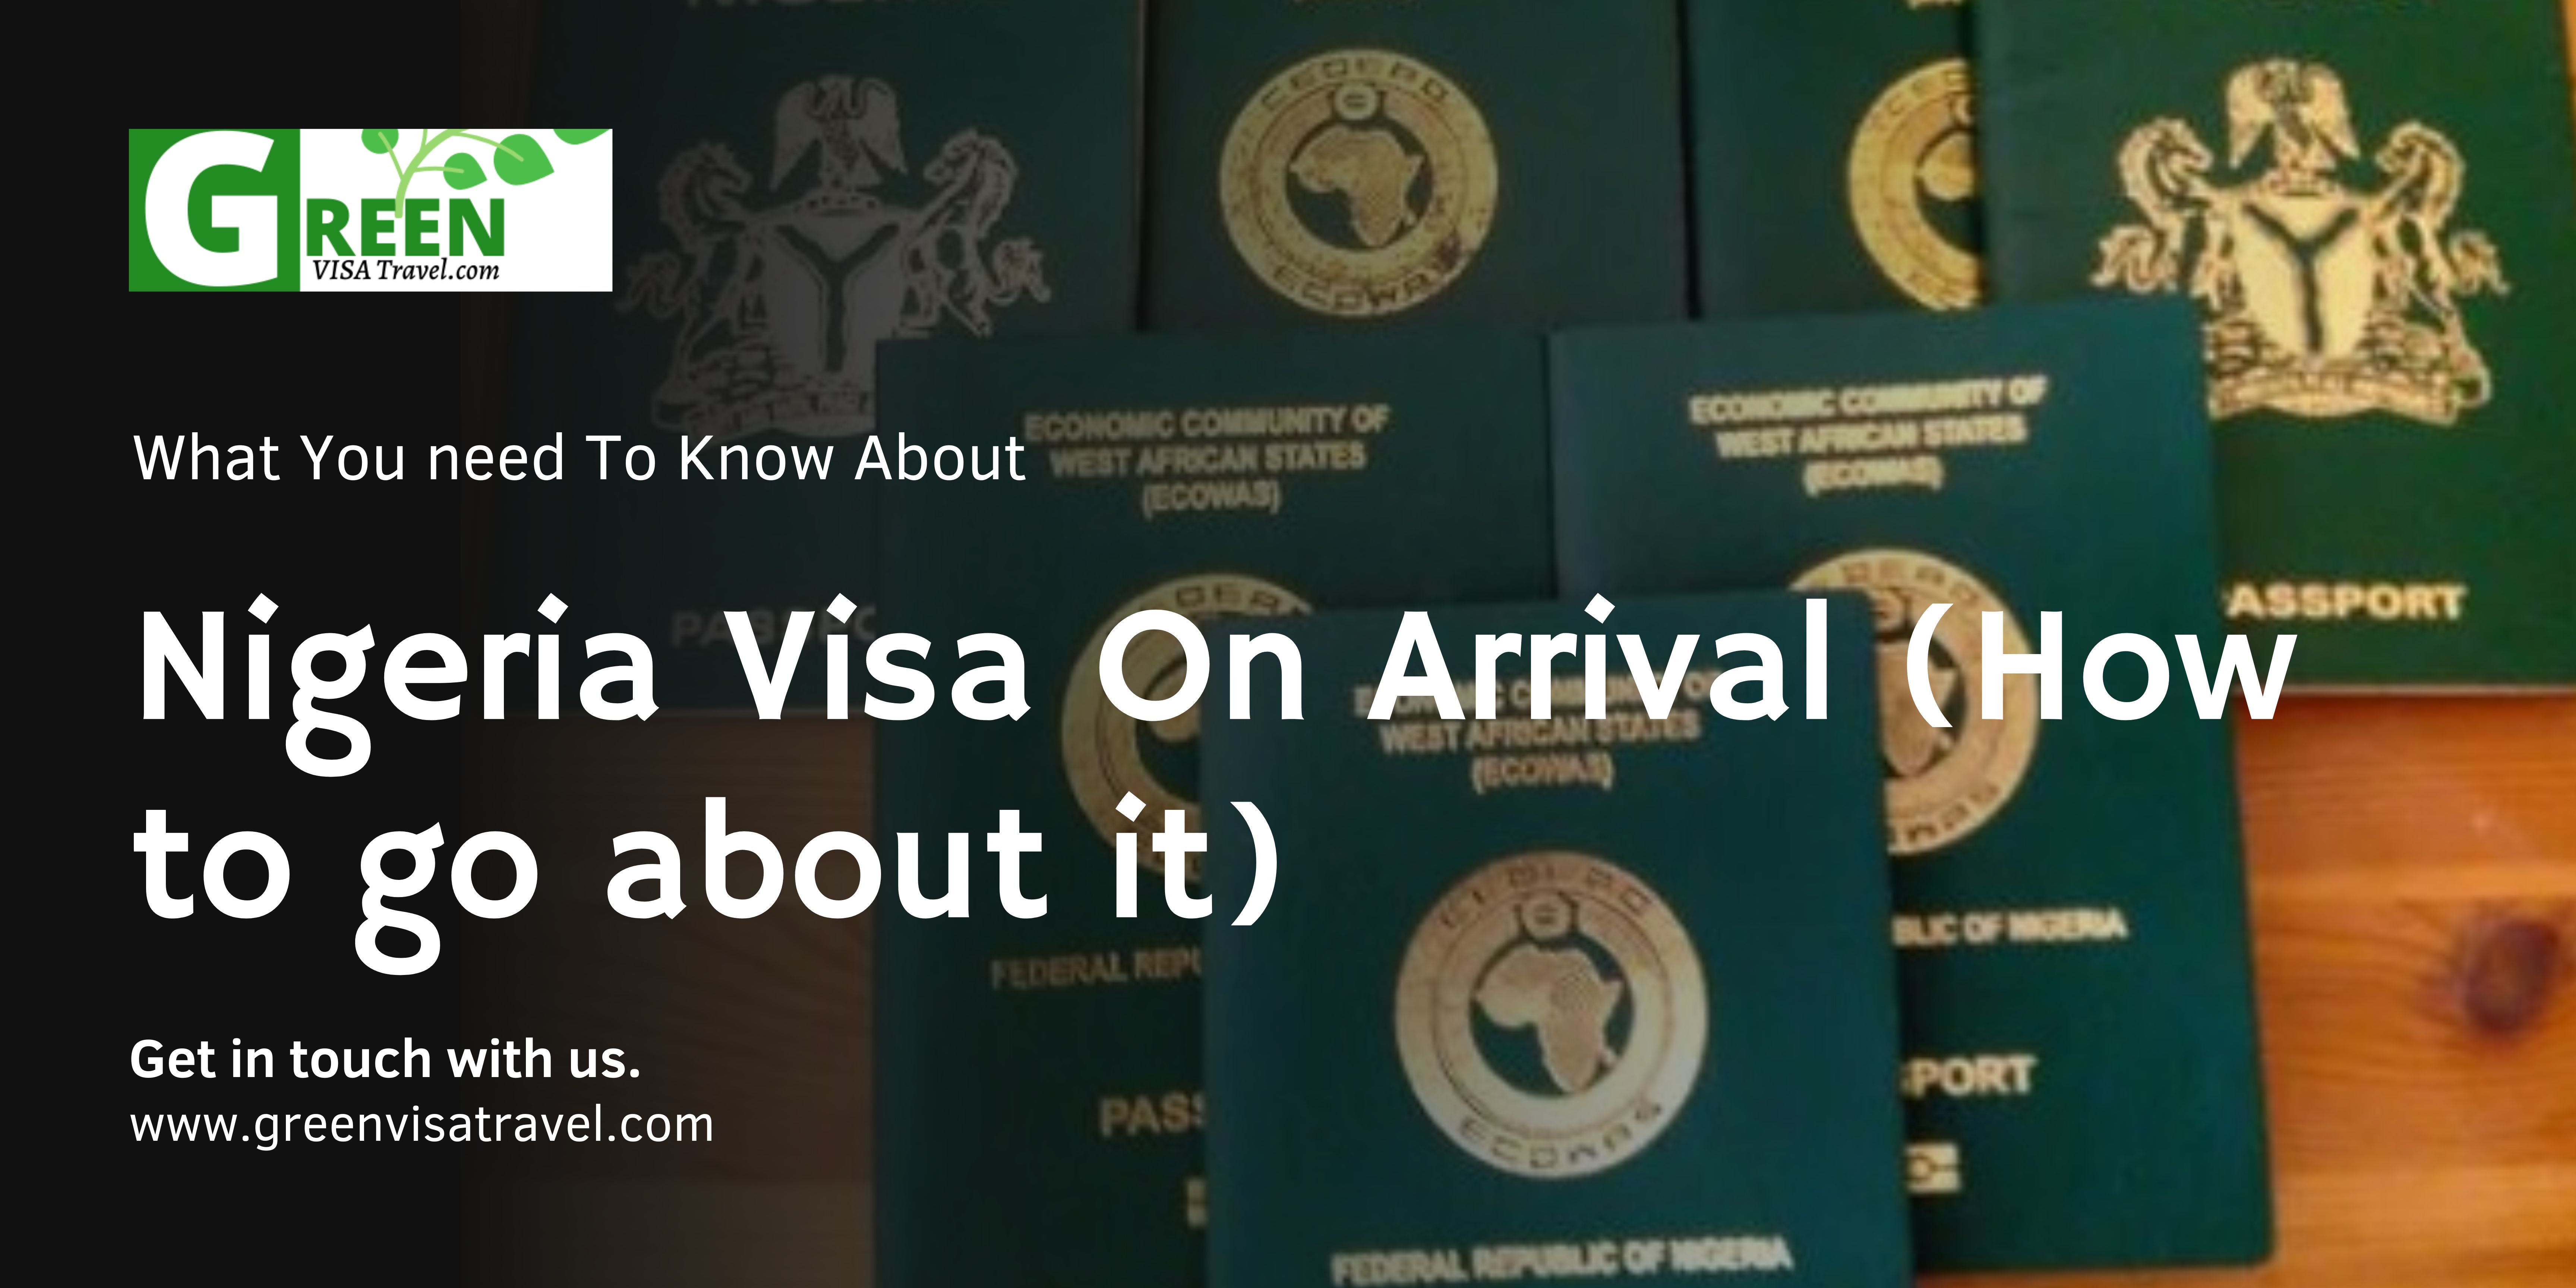 Nigeria Visa On Arrival (How to go about it)